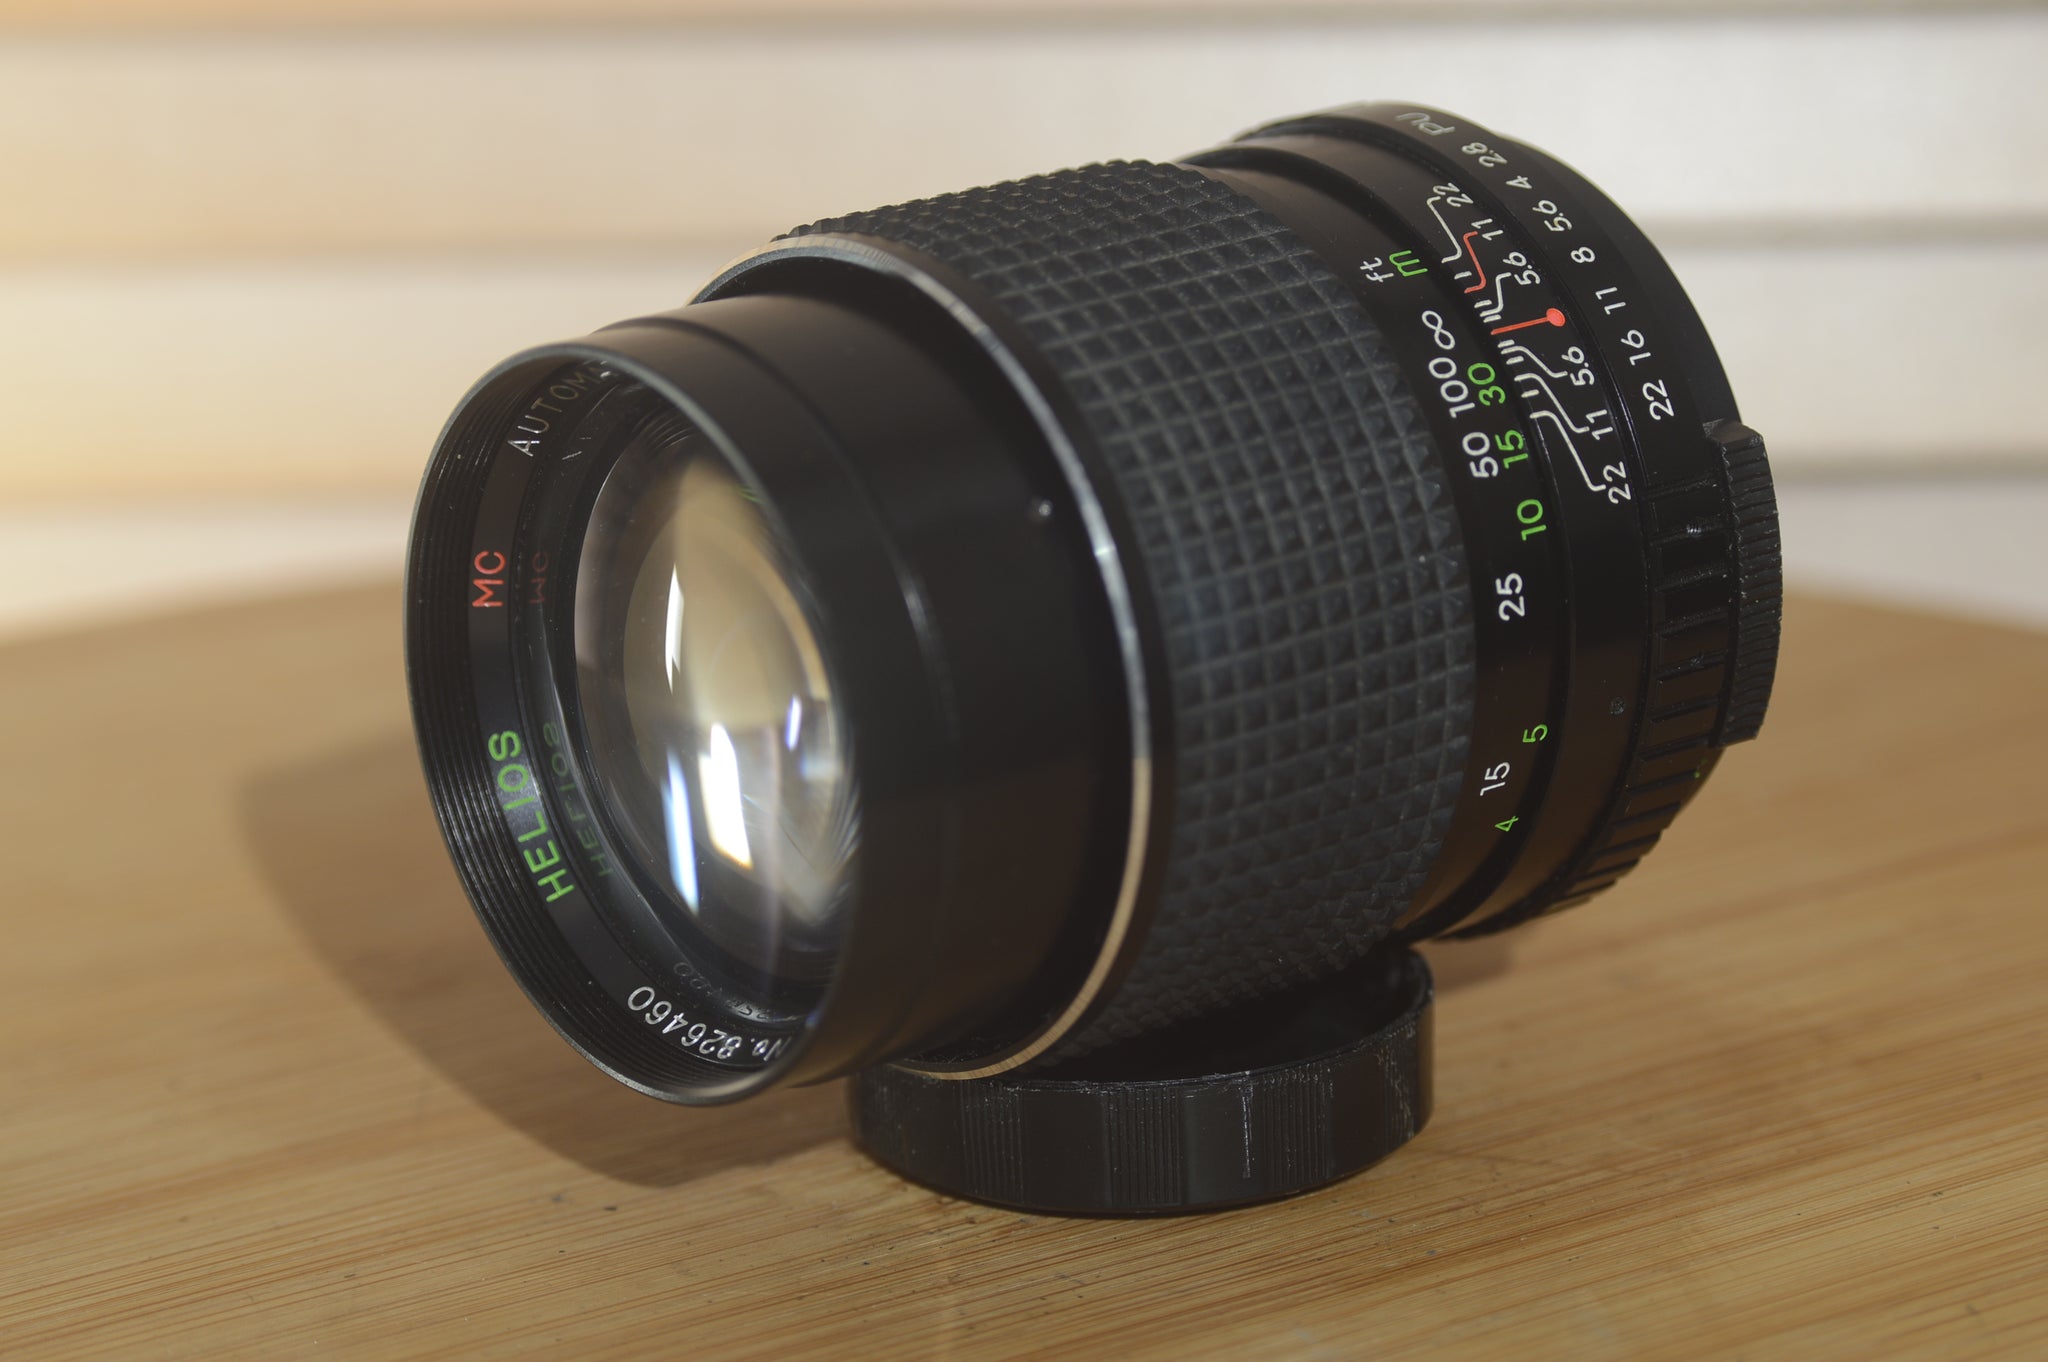 Helios M42 MC 135mm f2.8 lens. Fantastic Condition portrait lens. - RewindCameras quality vintage cameras, fully tested and serviced